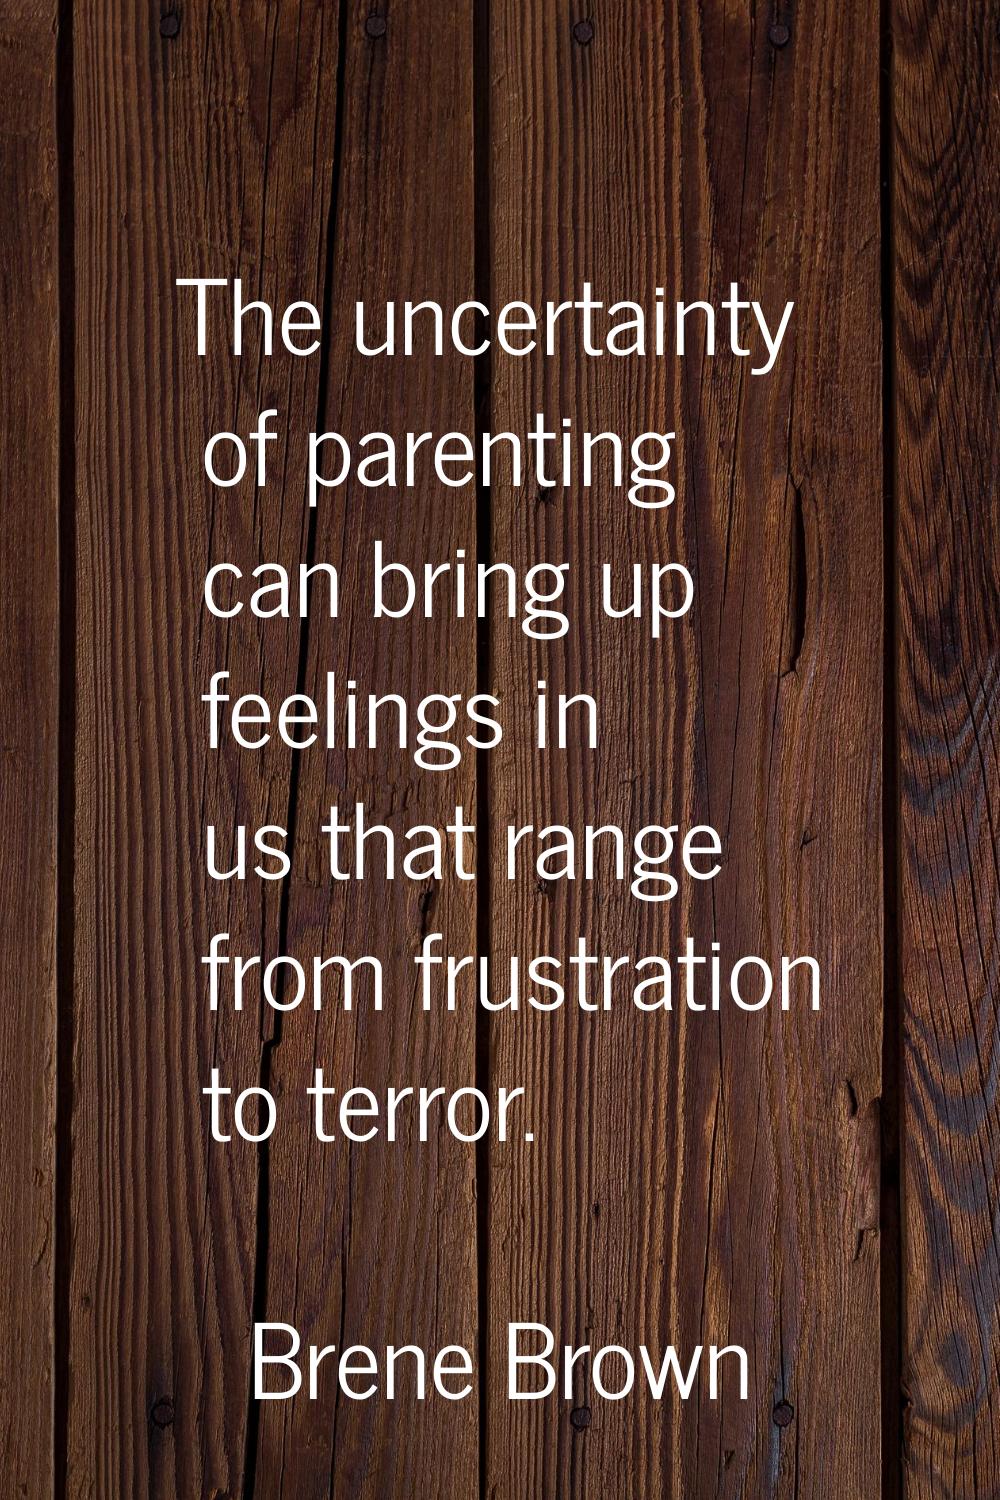 The uncertainty of parenting can bring up feelings in us that range from frustration to terror.